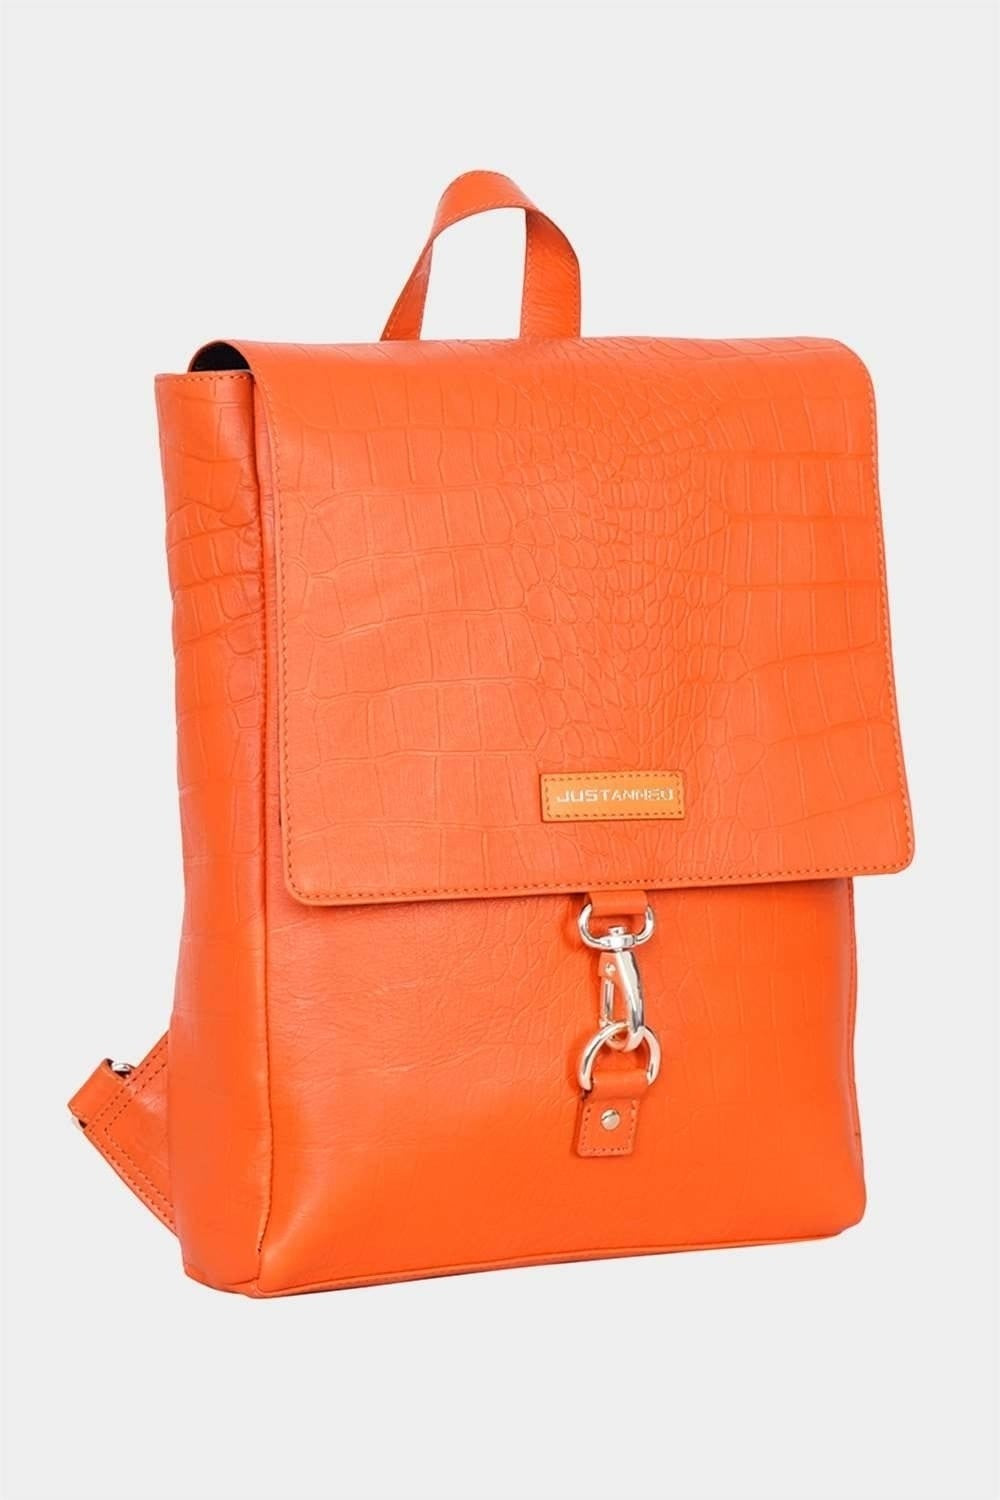 Justanned Womens Orange Leather Backpack